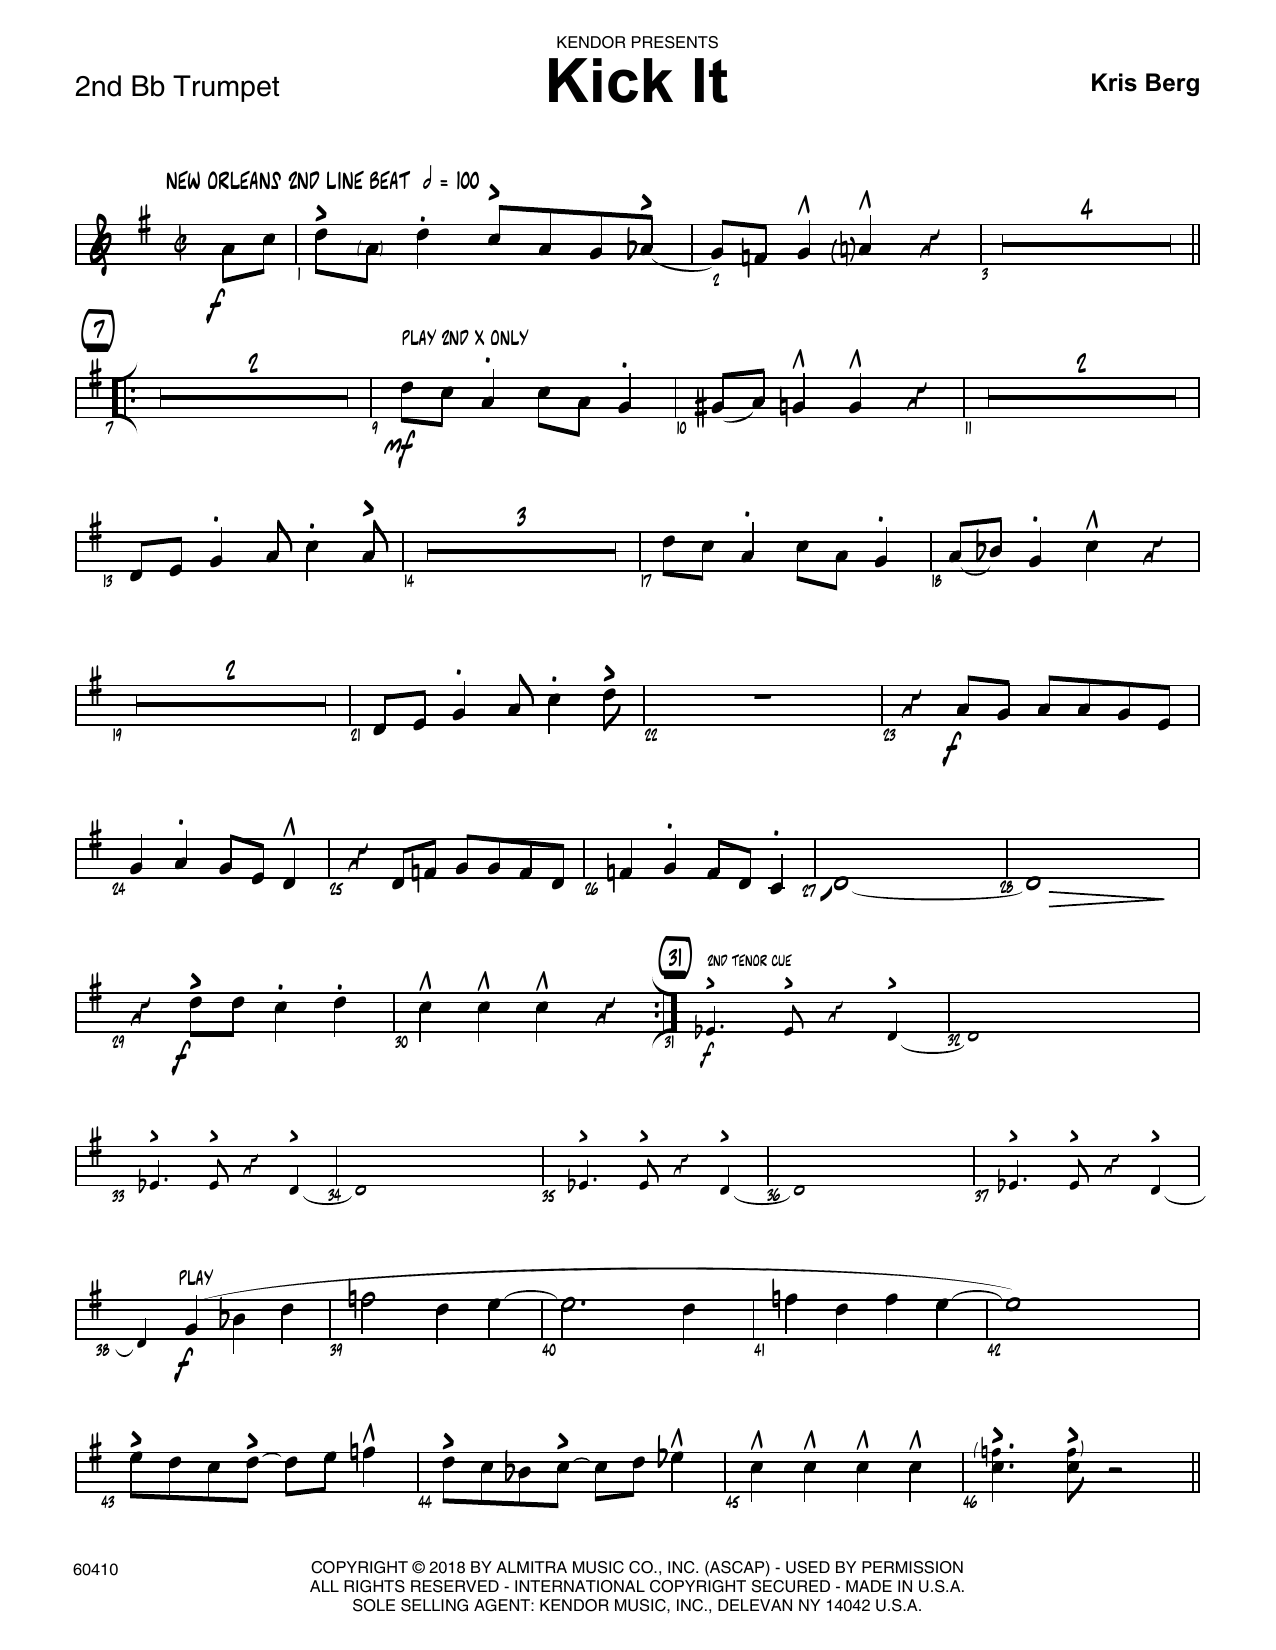 Kris Berg Kick It - 2nd Bb Trumpet sheet music preview music notes and score for Jazz Ensemble including 3 page(s)